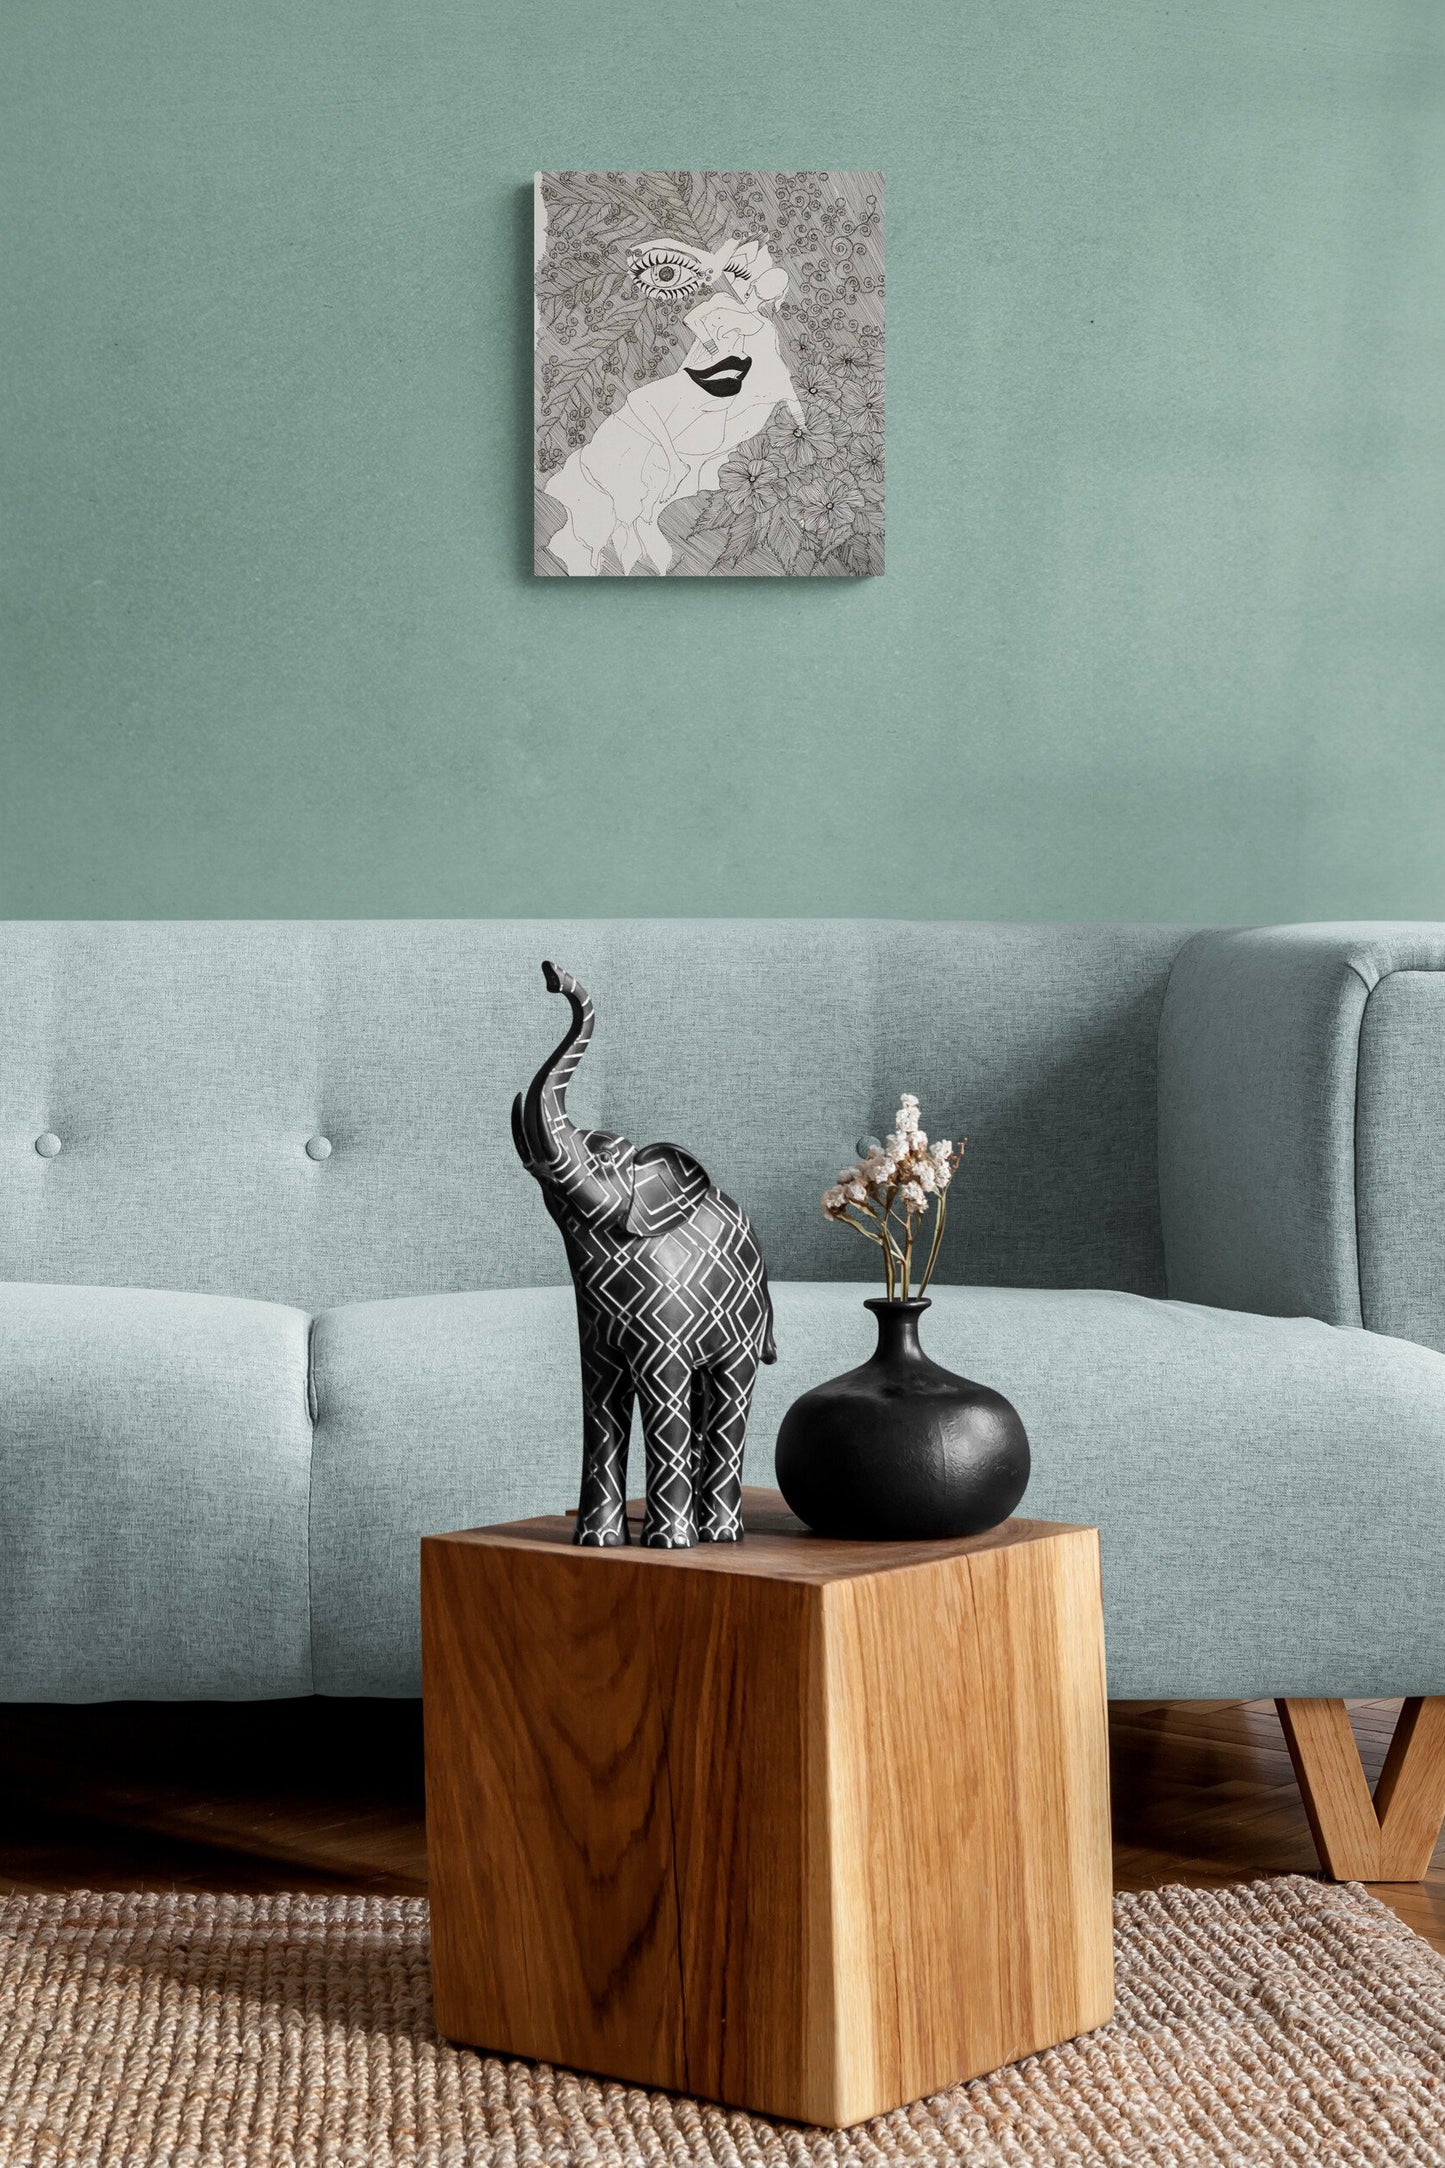 Striking Figural Female Painting in greyscale compliments this natural living space